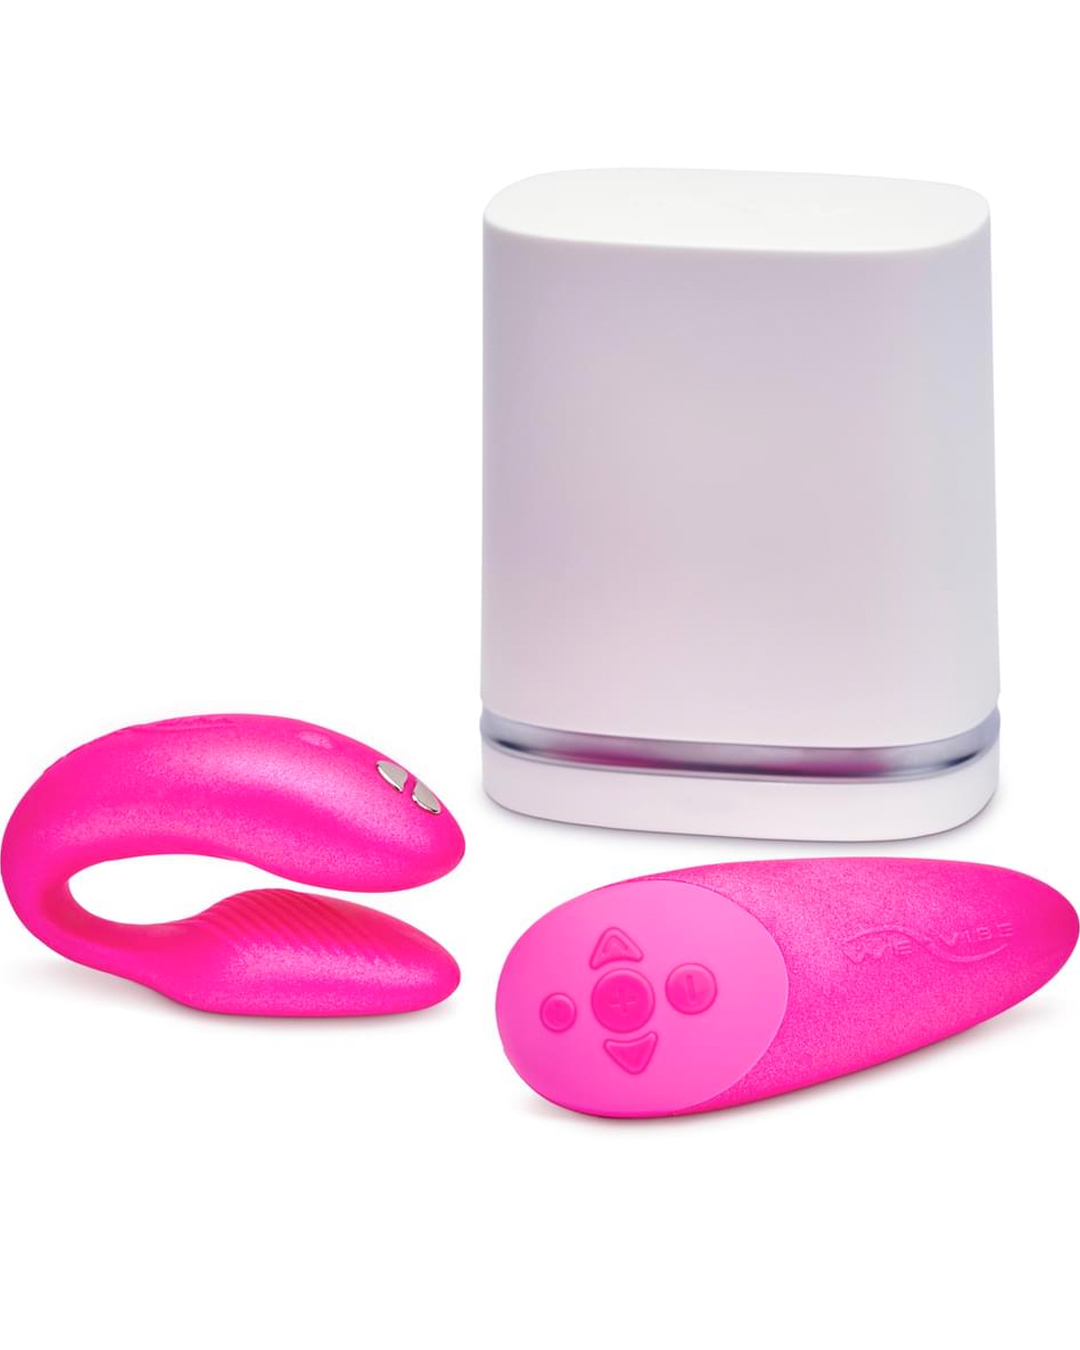 Two pink vibrators and another device. 